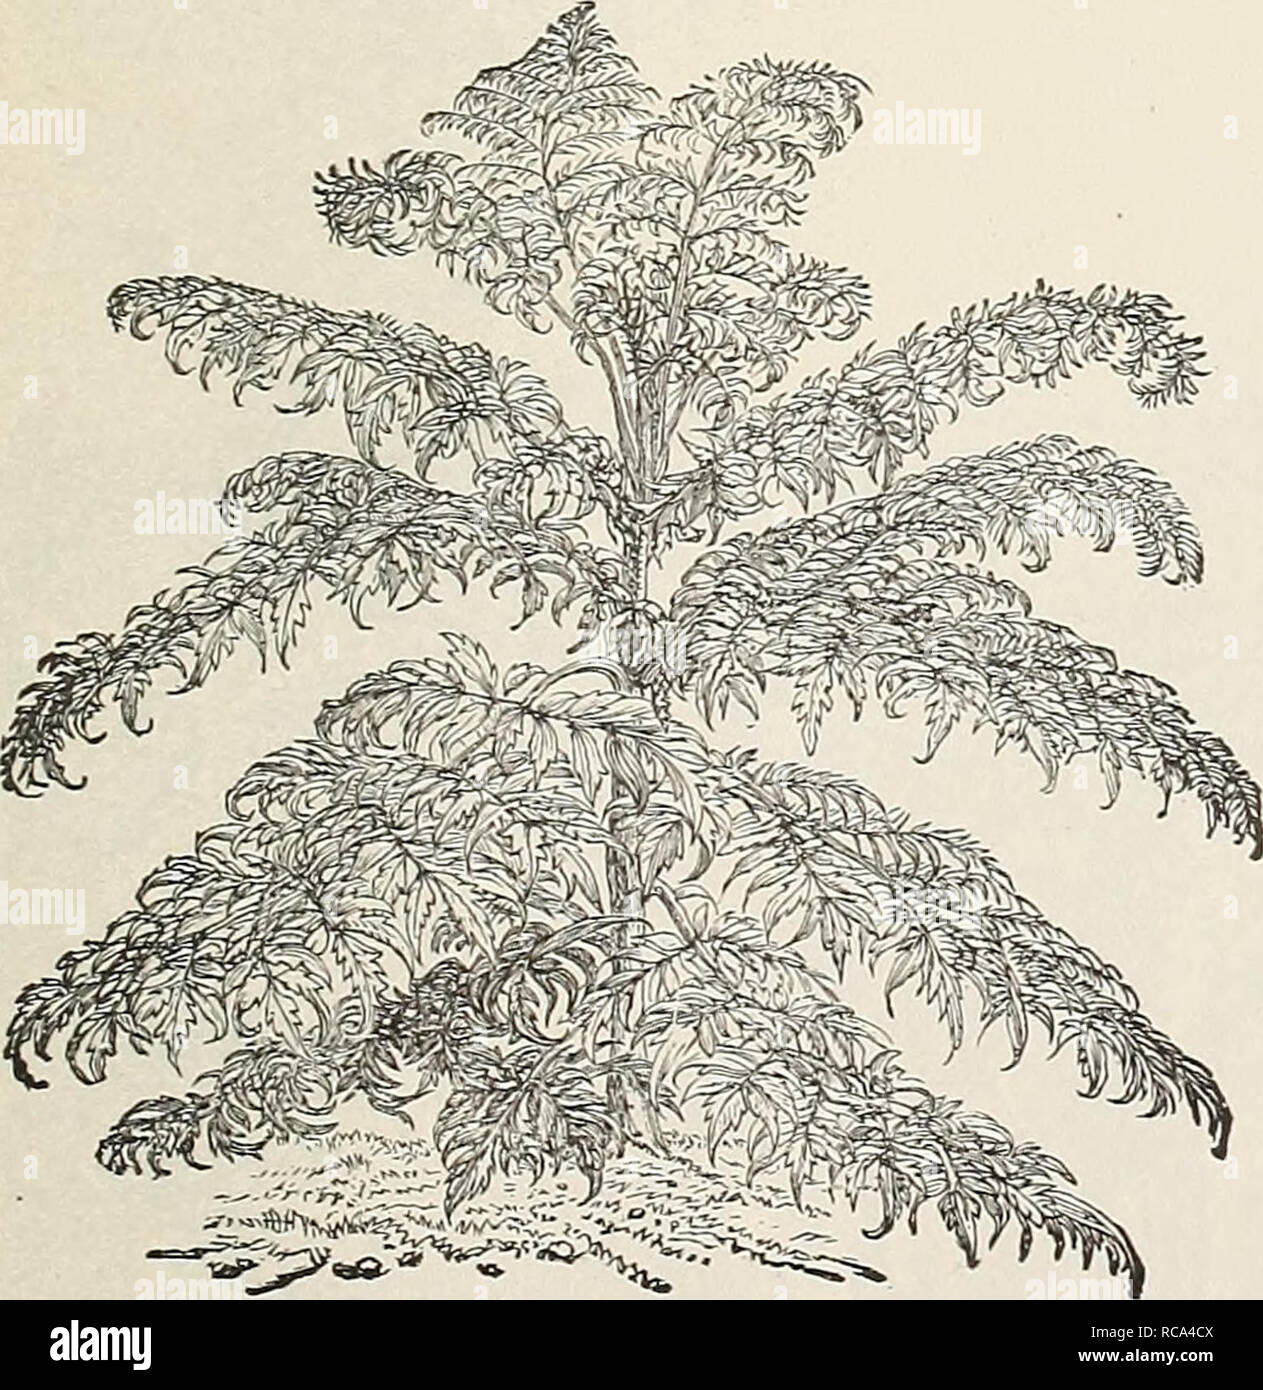 . [Ellwanger &amp; Barry's general catalogue]. Rhodotypus Kerrioides. {Reduced.) fern leaves; dark green above and glaucous below, and. Rhus glabra var. laciniata—Cut-leaved Sumach. (Reduced.) KIBES. CiiiTant. .ToHANNiSBEERE, Ger. Groseillier, Fi&quot;. The flowering currants are gay, beautiful shrubs in early spring, and of the easiest culture. K. alpina. D. A good old variety. Small yel- low flowers. Distinct. 3.5c. K. aiireiim. YELLOW-FLOWERING CURRANT. D. A native species, with glabrous, shining leaves, and yellow flowers. 35c. K. Gordonianum. GORDON'S CURRANT. D. A hj'brid between aureum  Stock Photo